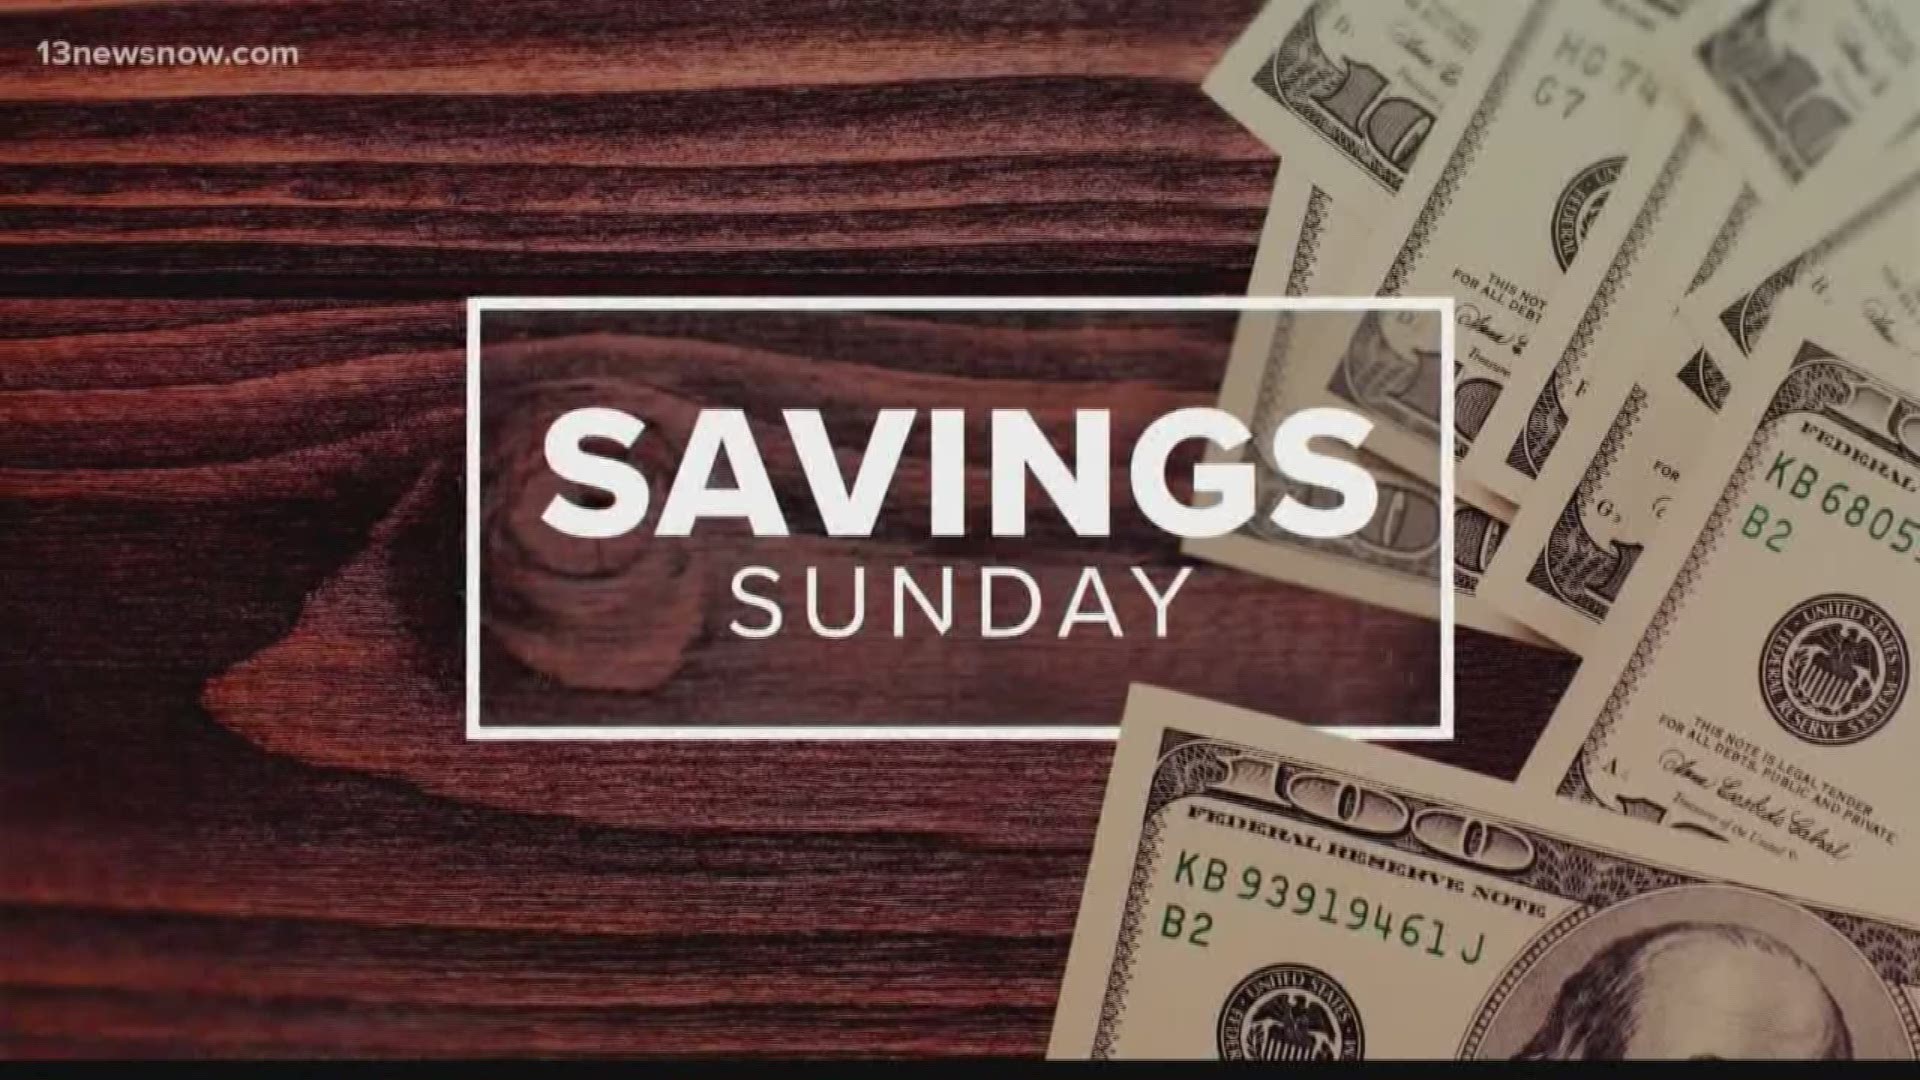 Laura Oliver from www.afrugalchick.com has your big savings for the week of Feb. 10, 2019.